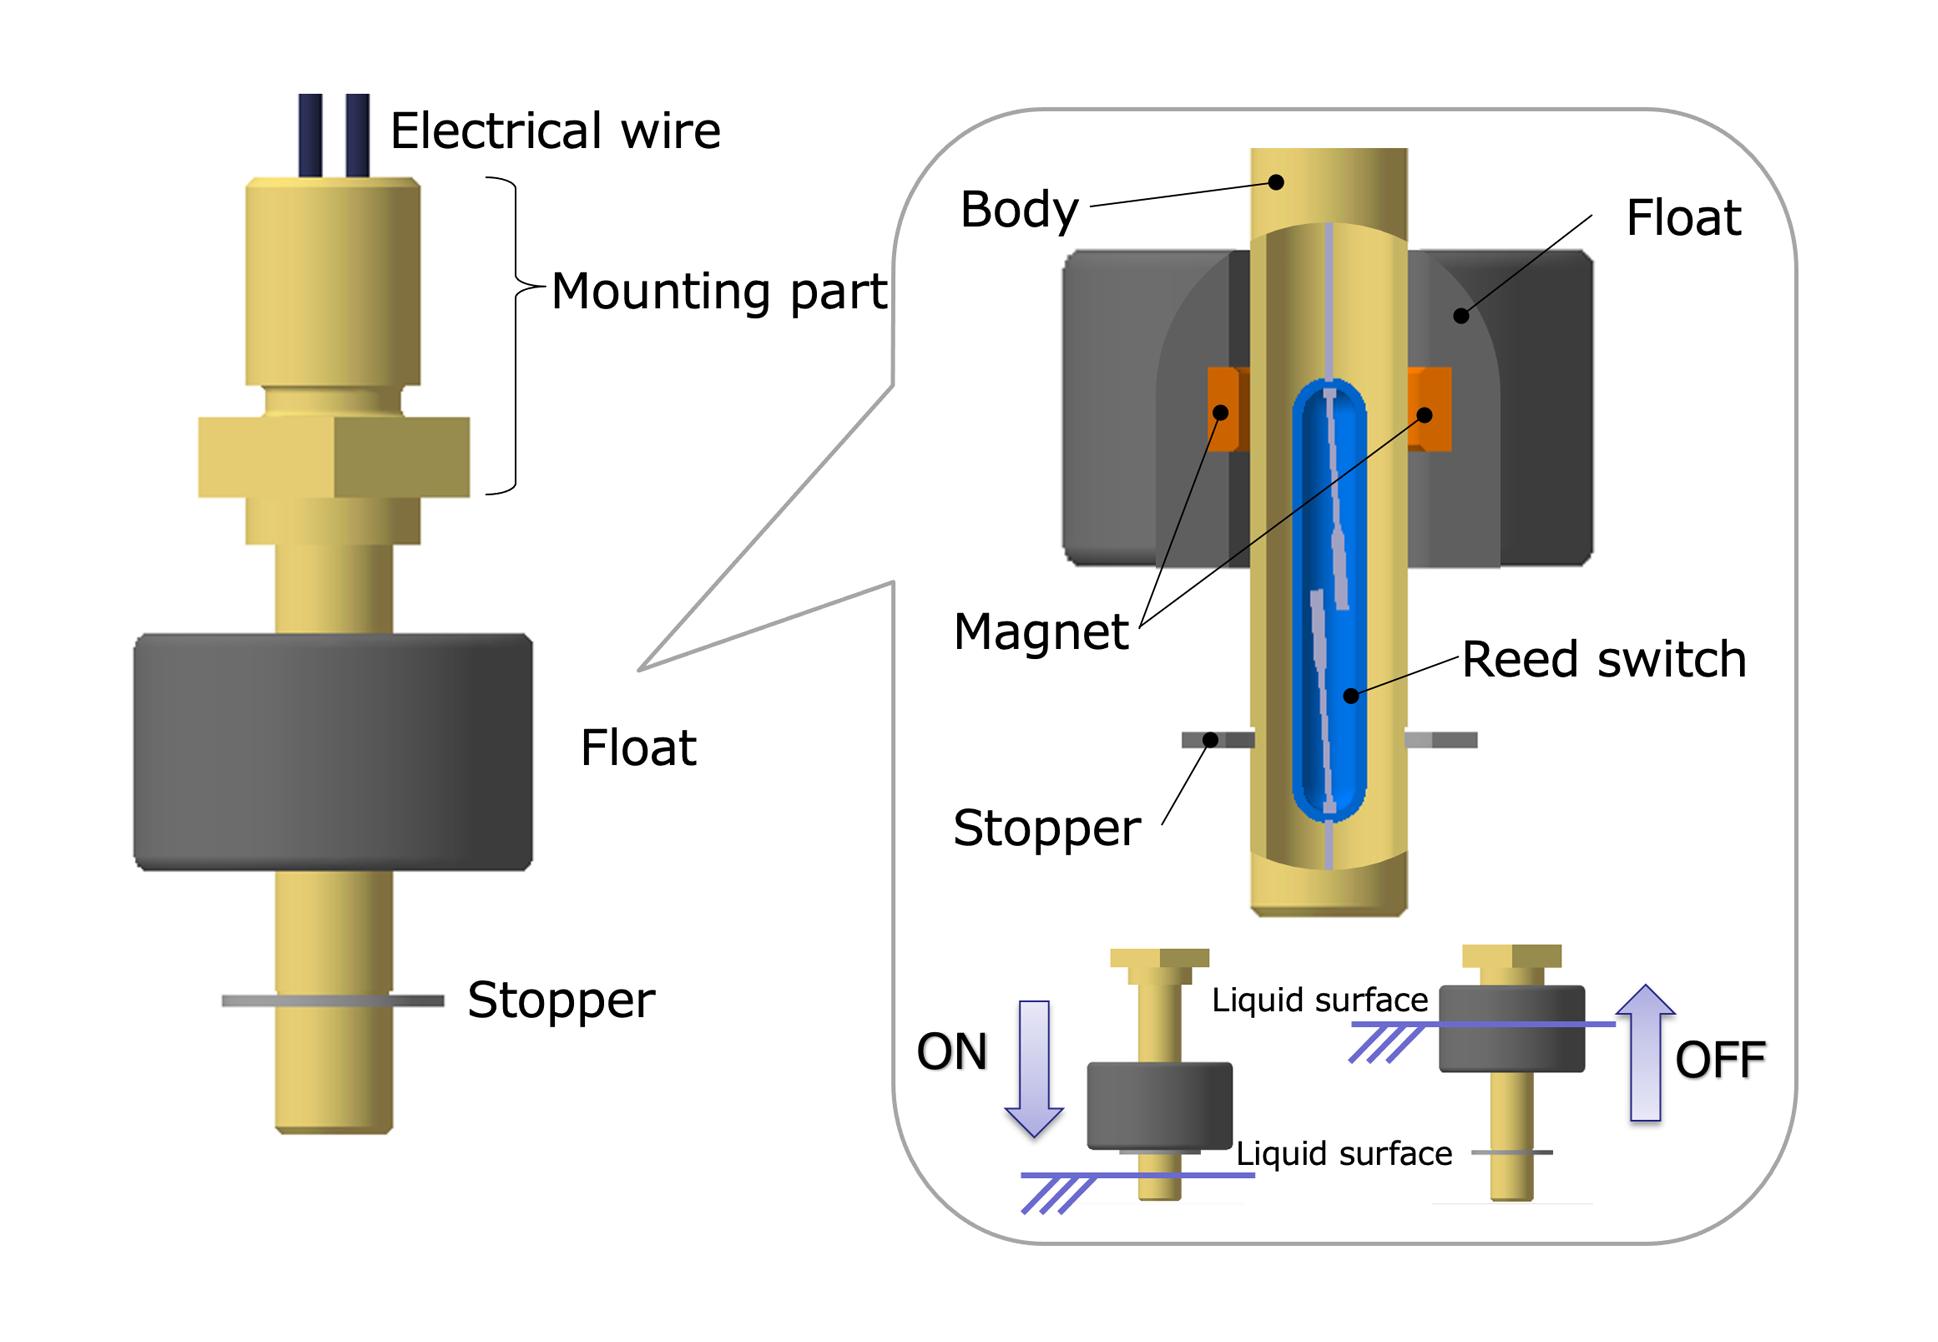 A leed switch is inserted inside the stem, and when the float goes up and down in response to the floatingness of the liquid level, the leed switch is operated by the magnetic force of the magnet built into the float and becomes ON. When the float is separated, the magnetic field is excluded, the elasticity of the leed fragment opens the contact, and becomes OFF.